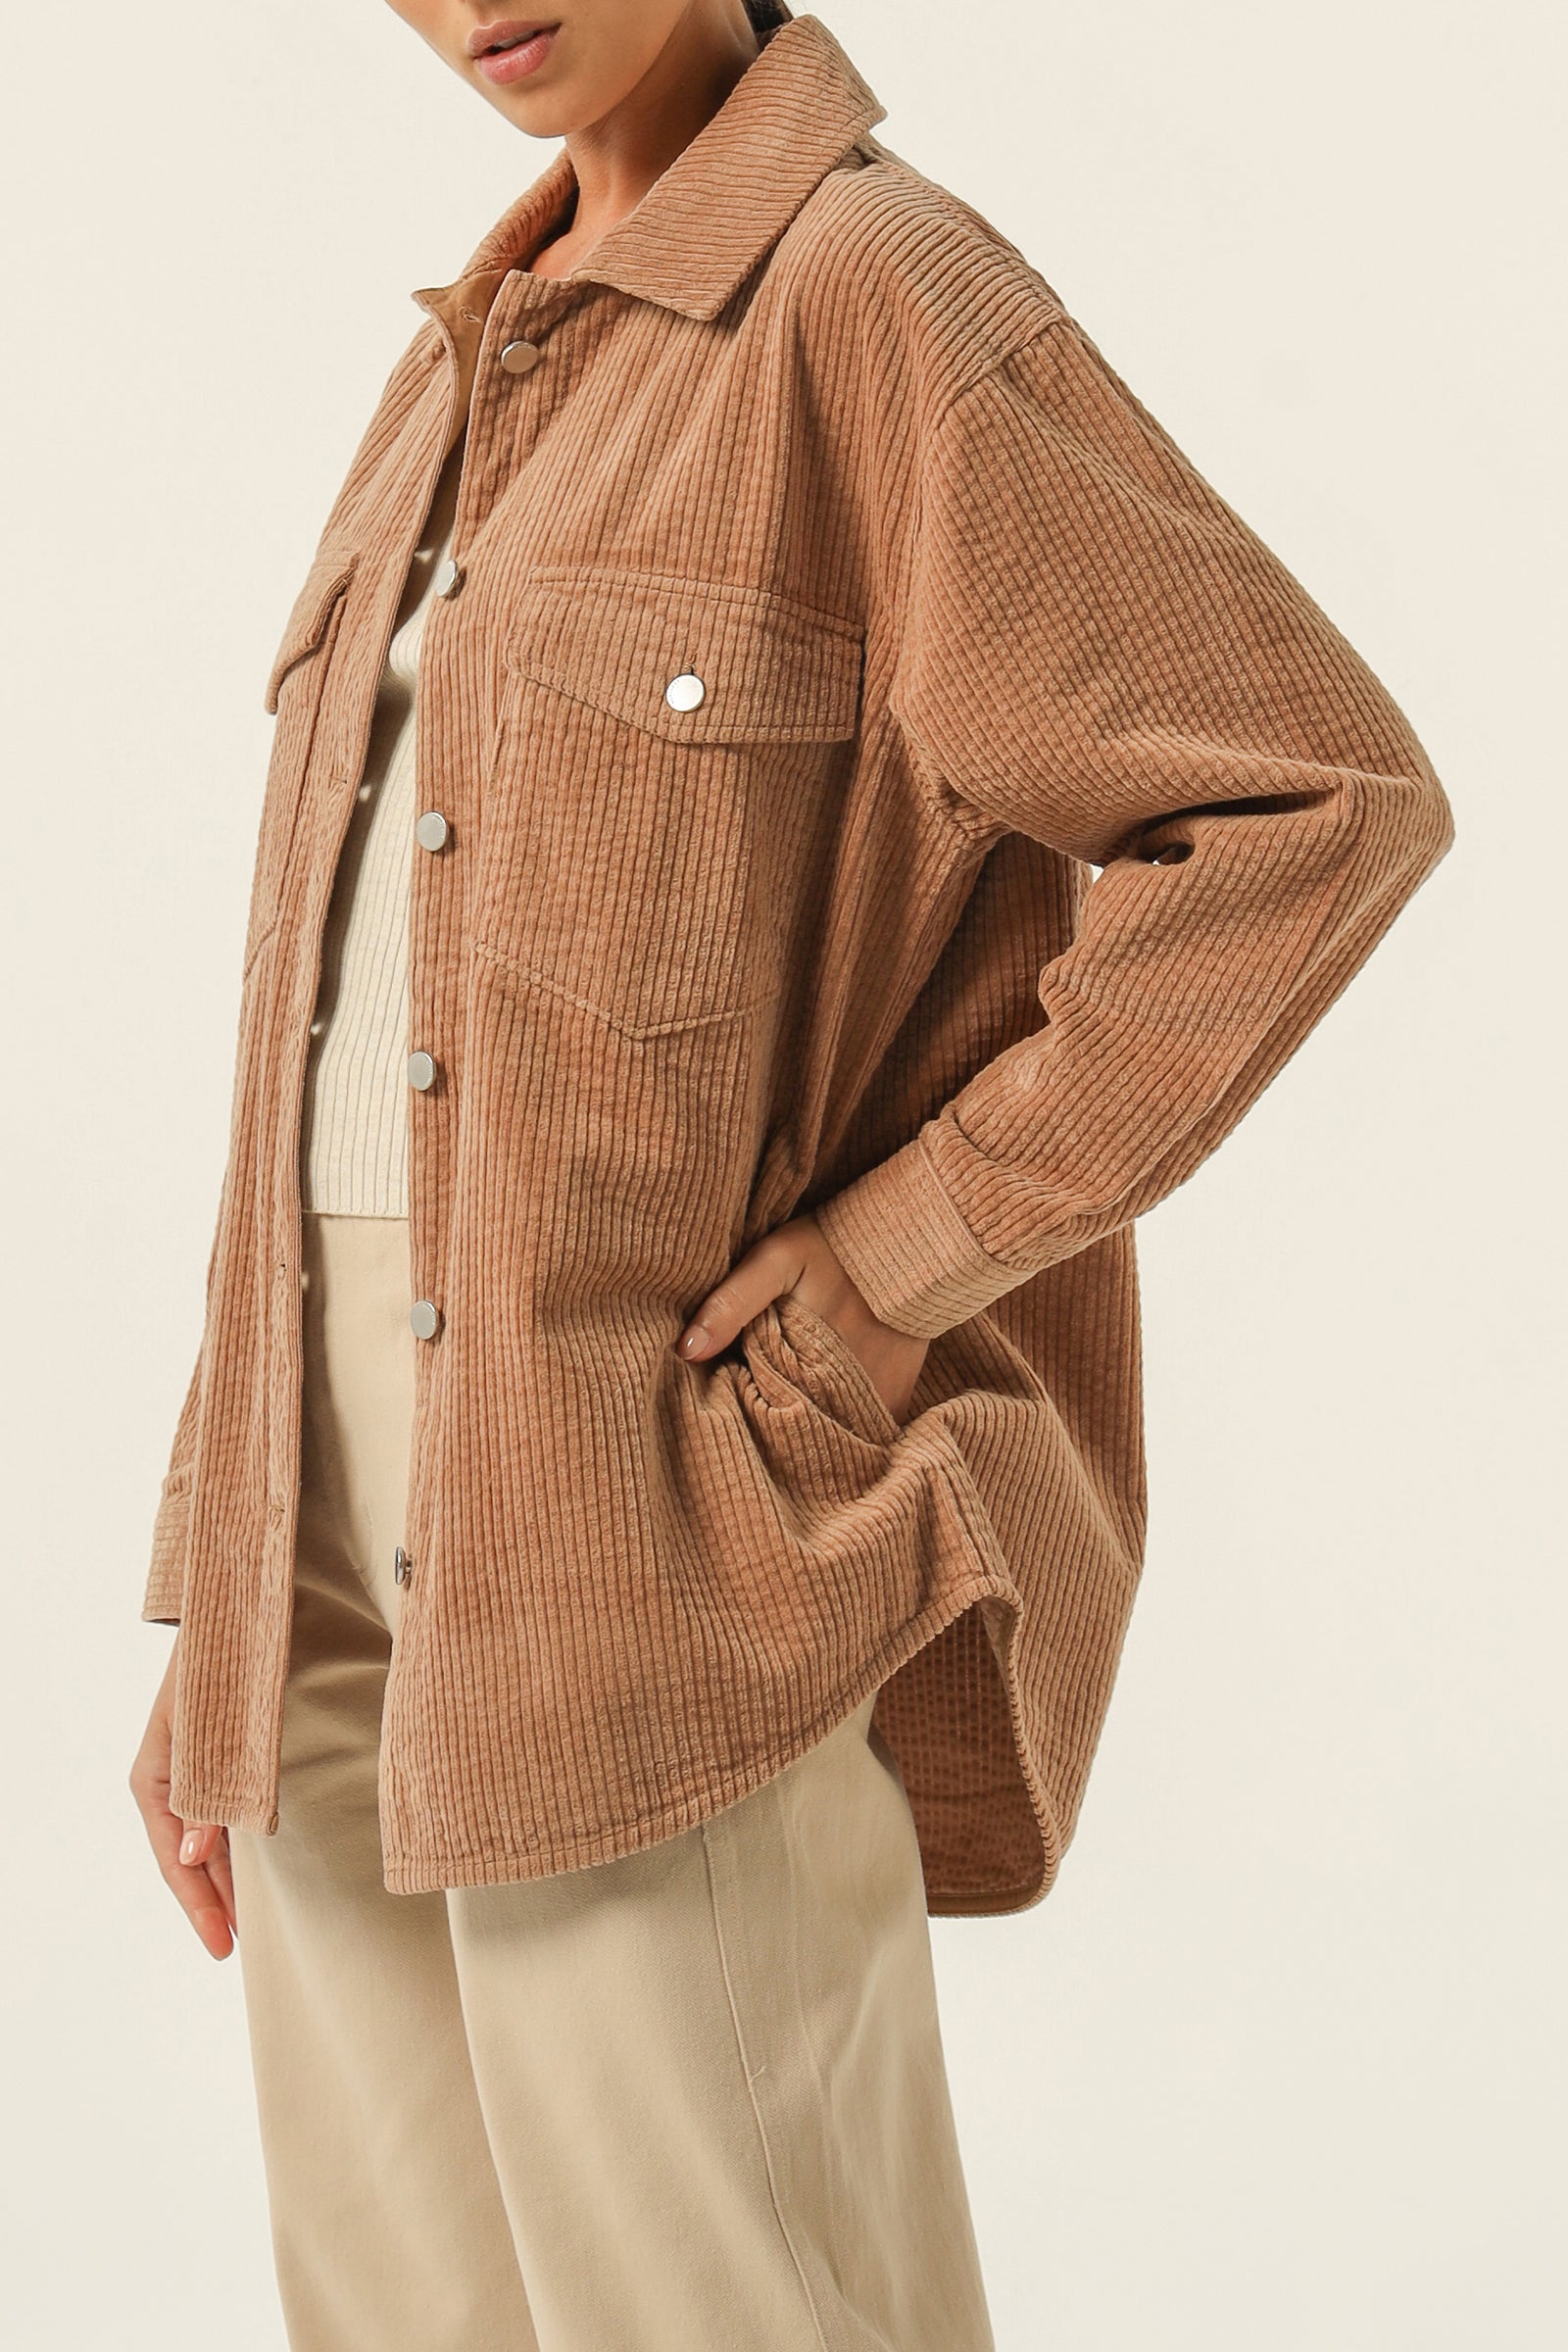 Nude Lucy Paige Corduroy Shacket in a Brown Coffee Colour